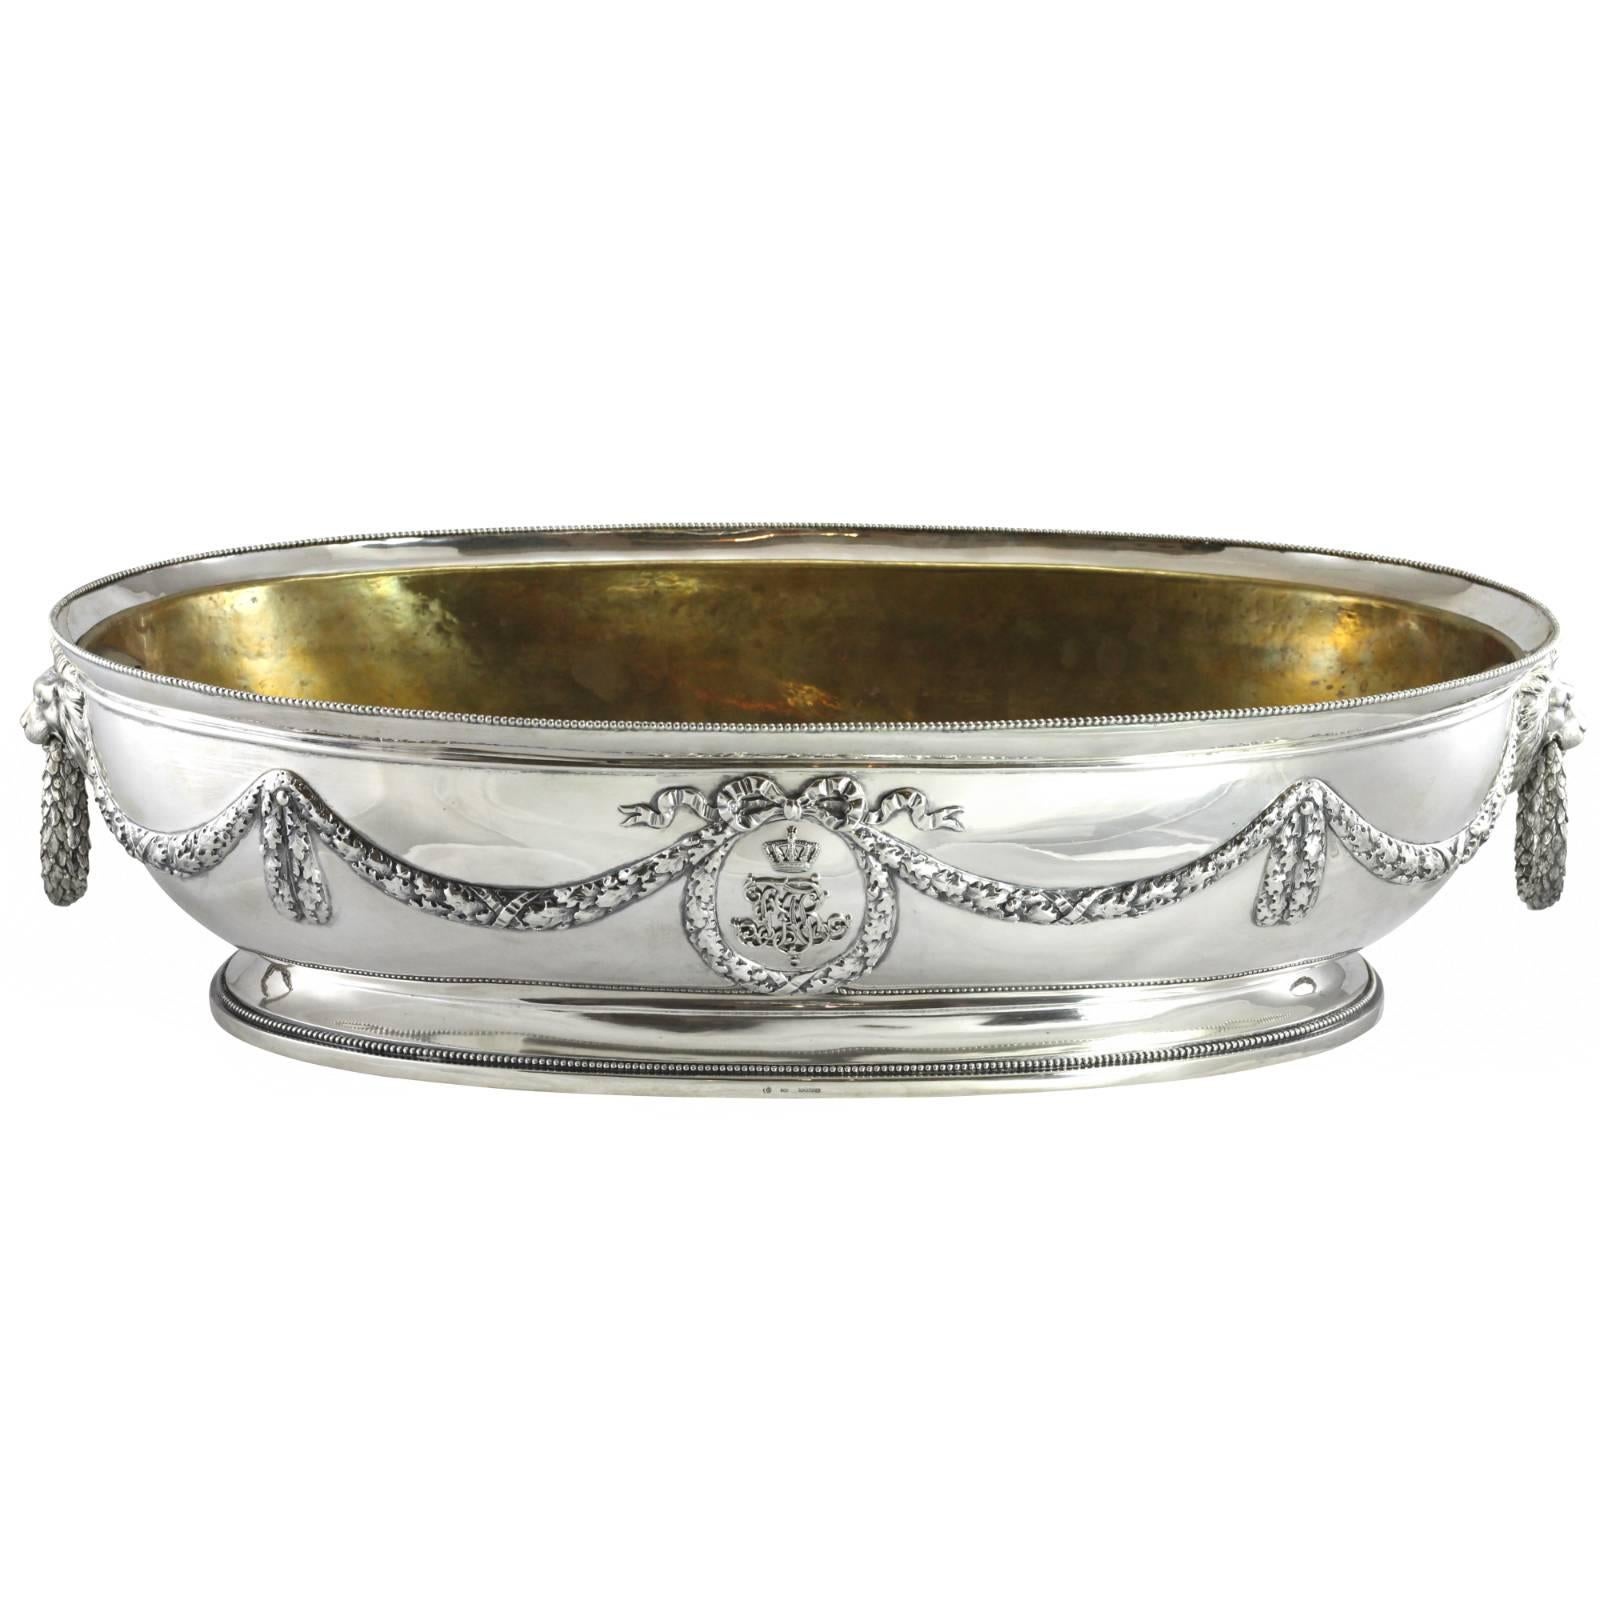 A .800 continental silver oval shaped presentation champagne bucket by J. D. Schleissner Söhne of Hanau, Germany. The piece features a removable copper liner, which has been foil gilded. One side of the bucket displays a crowned monogram, with an